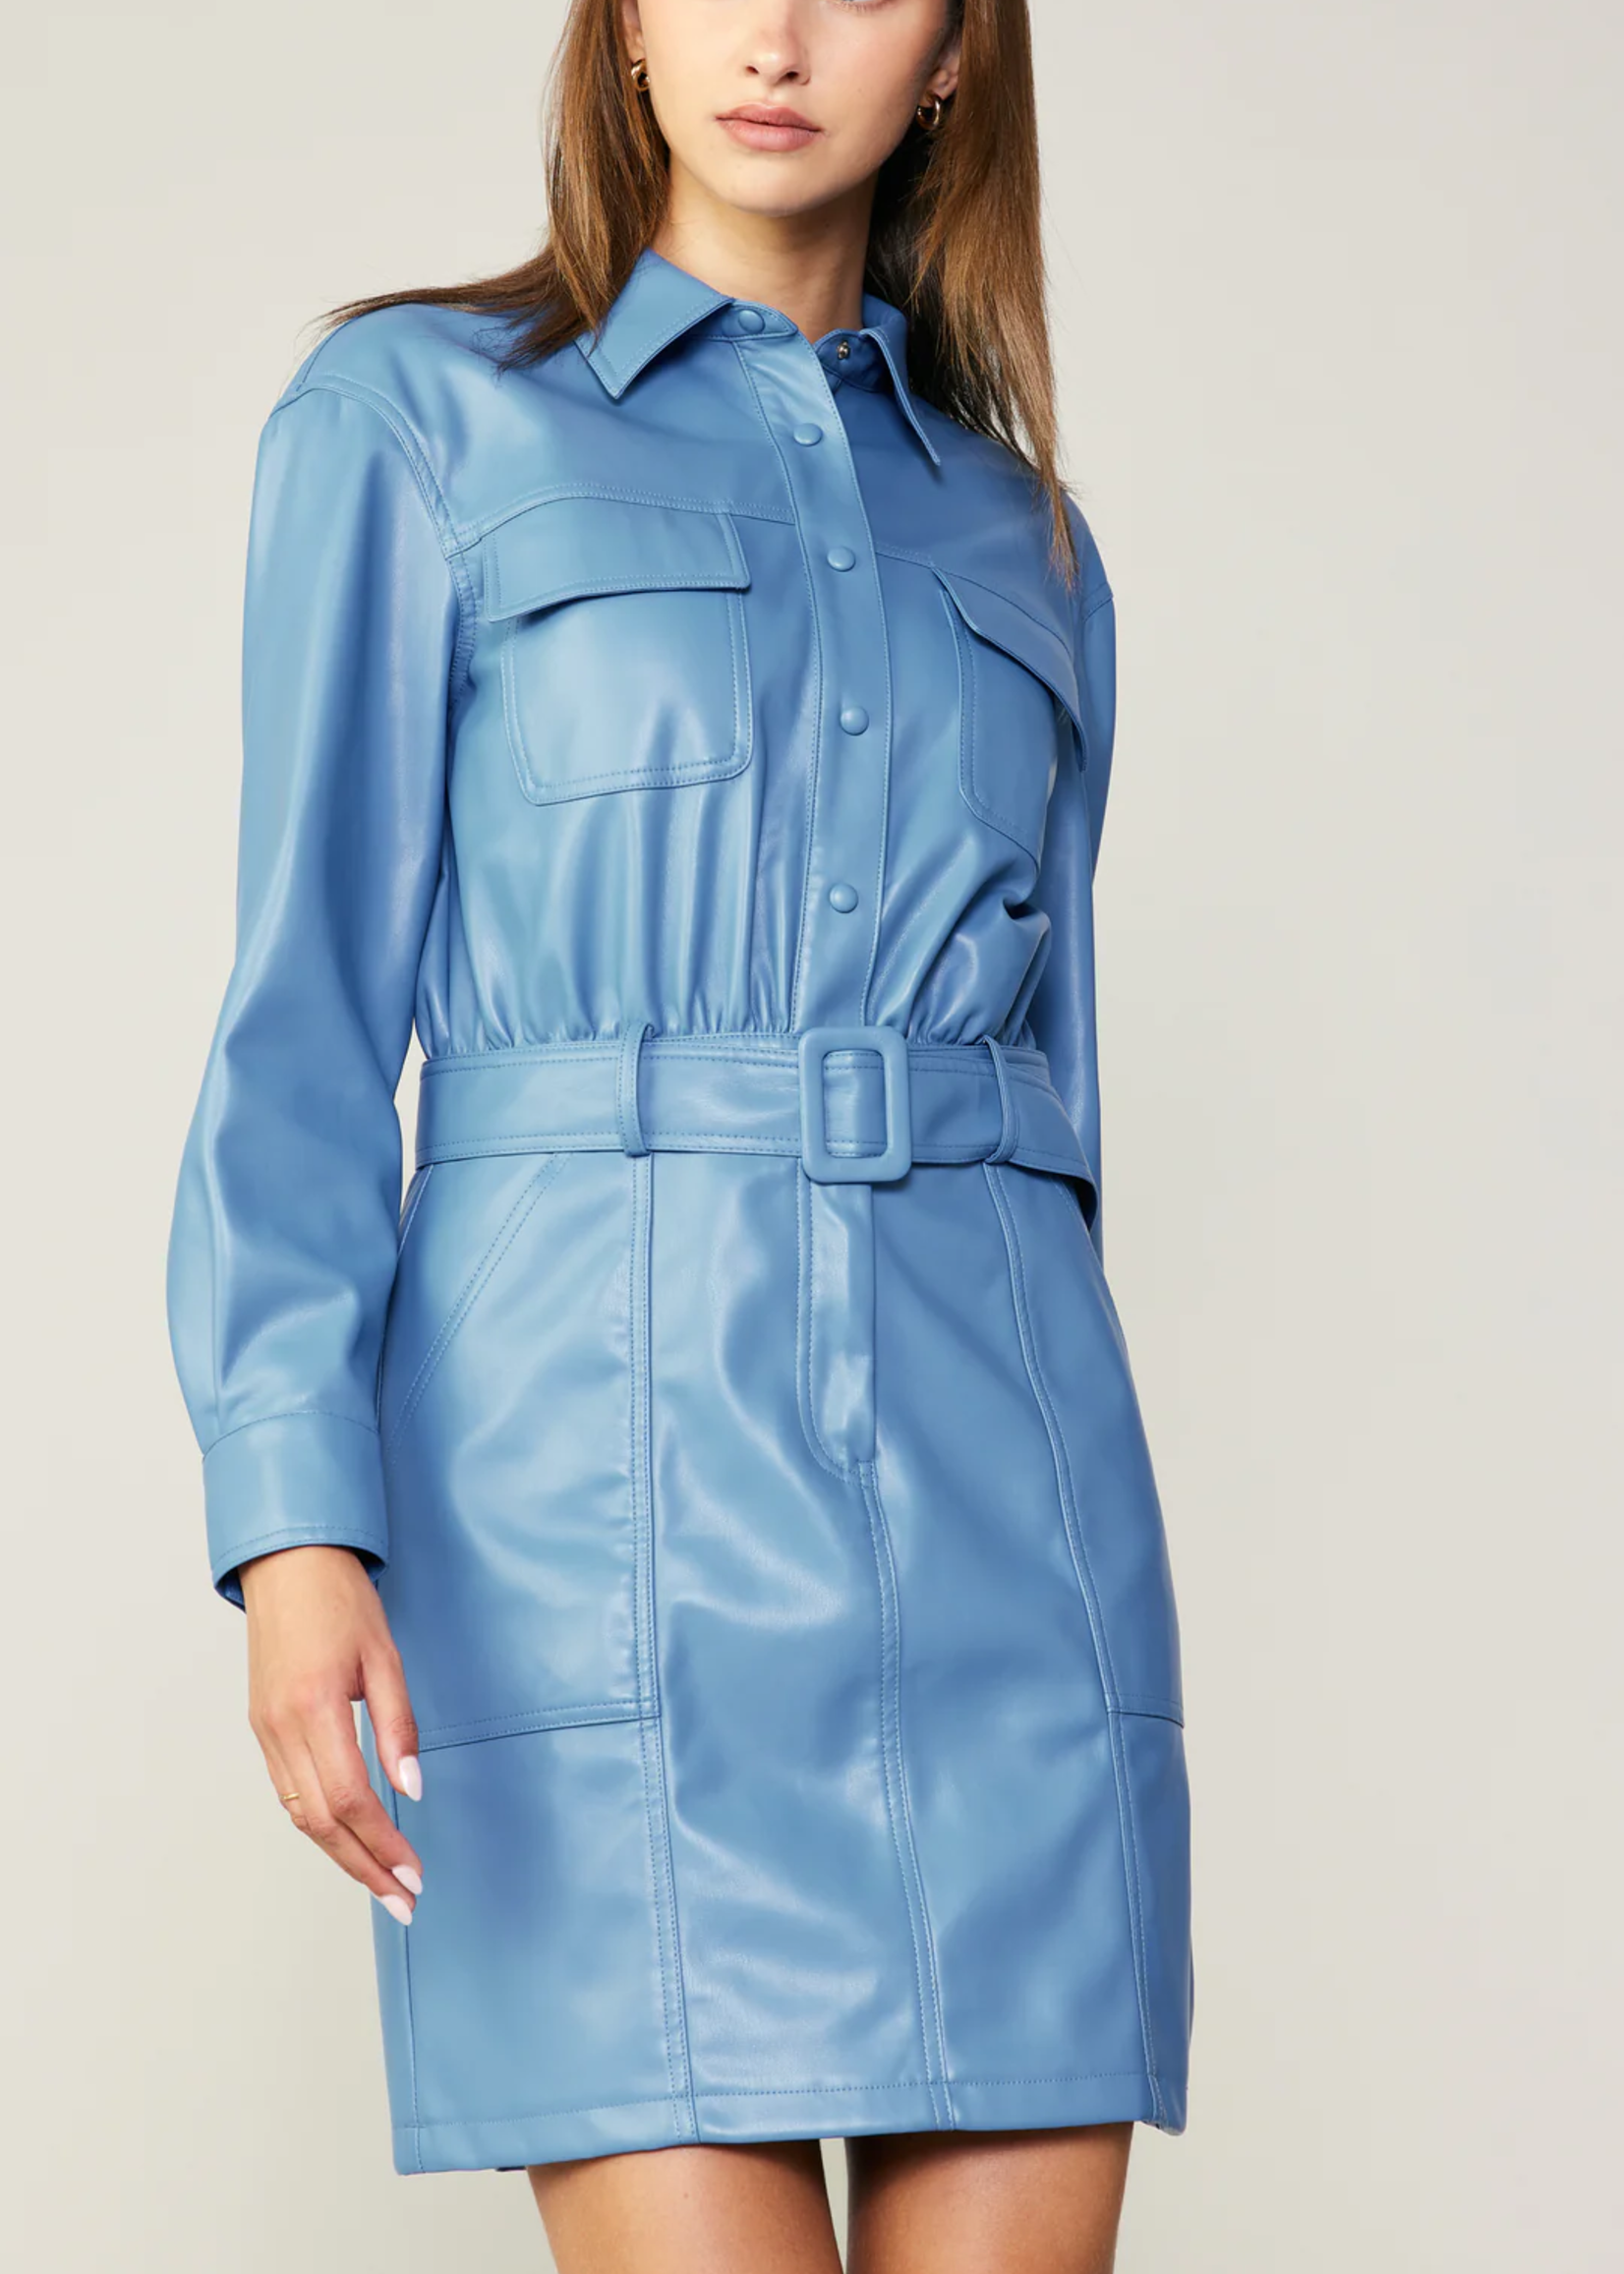 Current Air Belted Leather Shirtdress